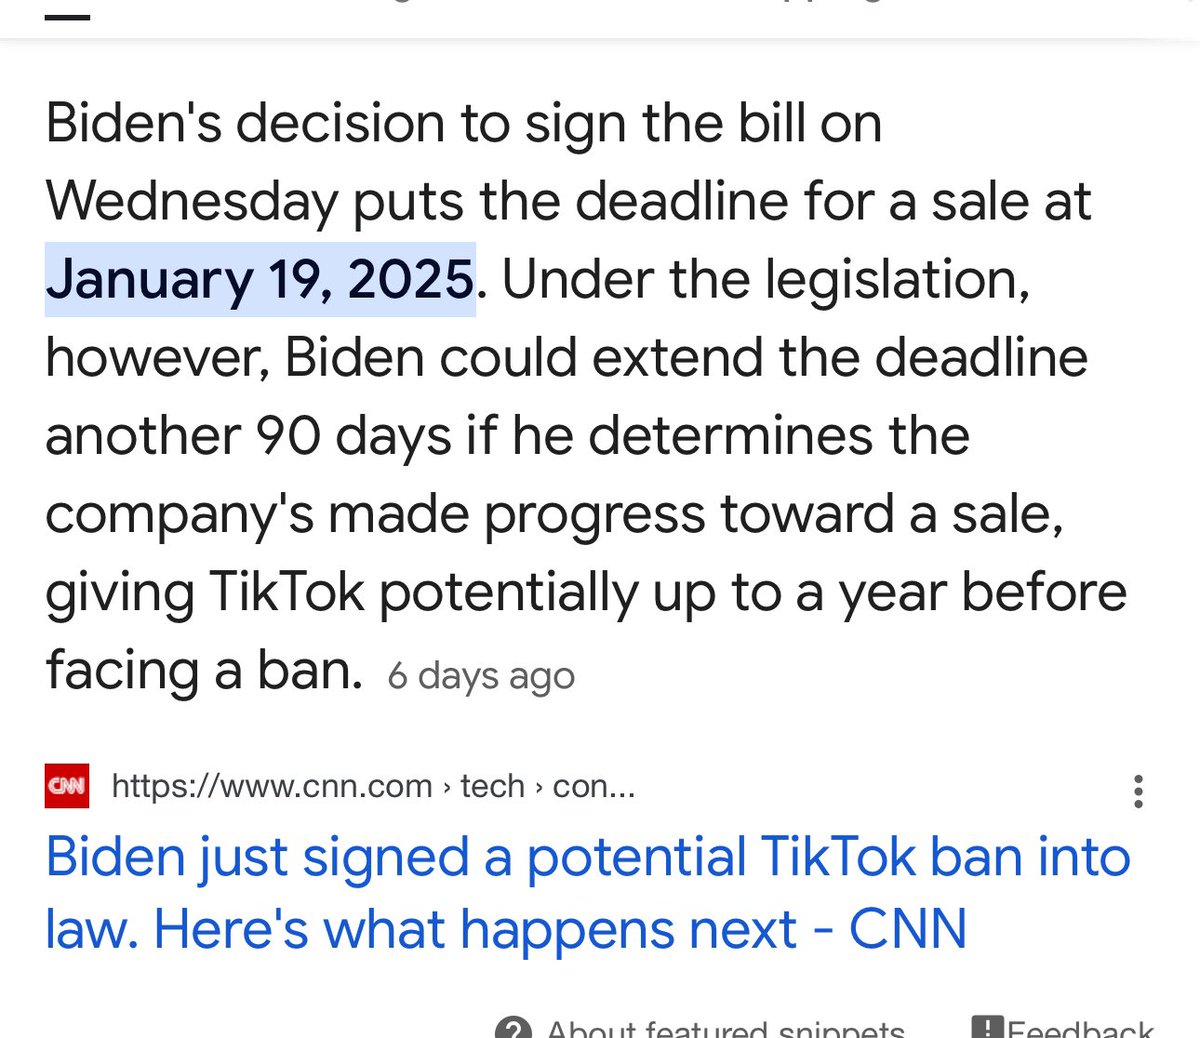 No coincidence that Biden put the deadline for the tik tok ban after the election to try and save the young vote unaware of his actions